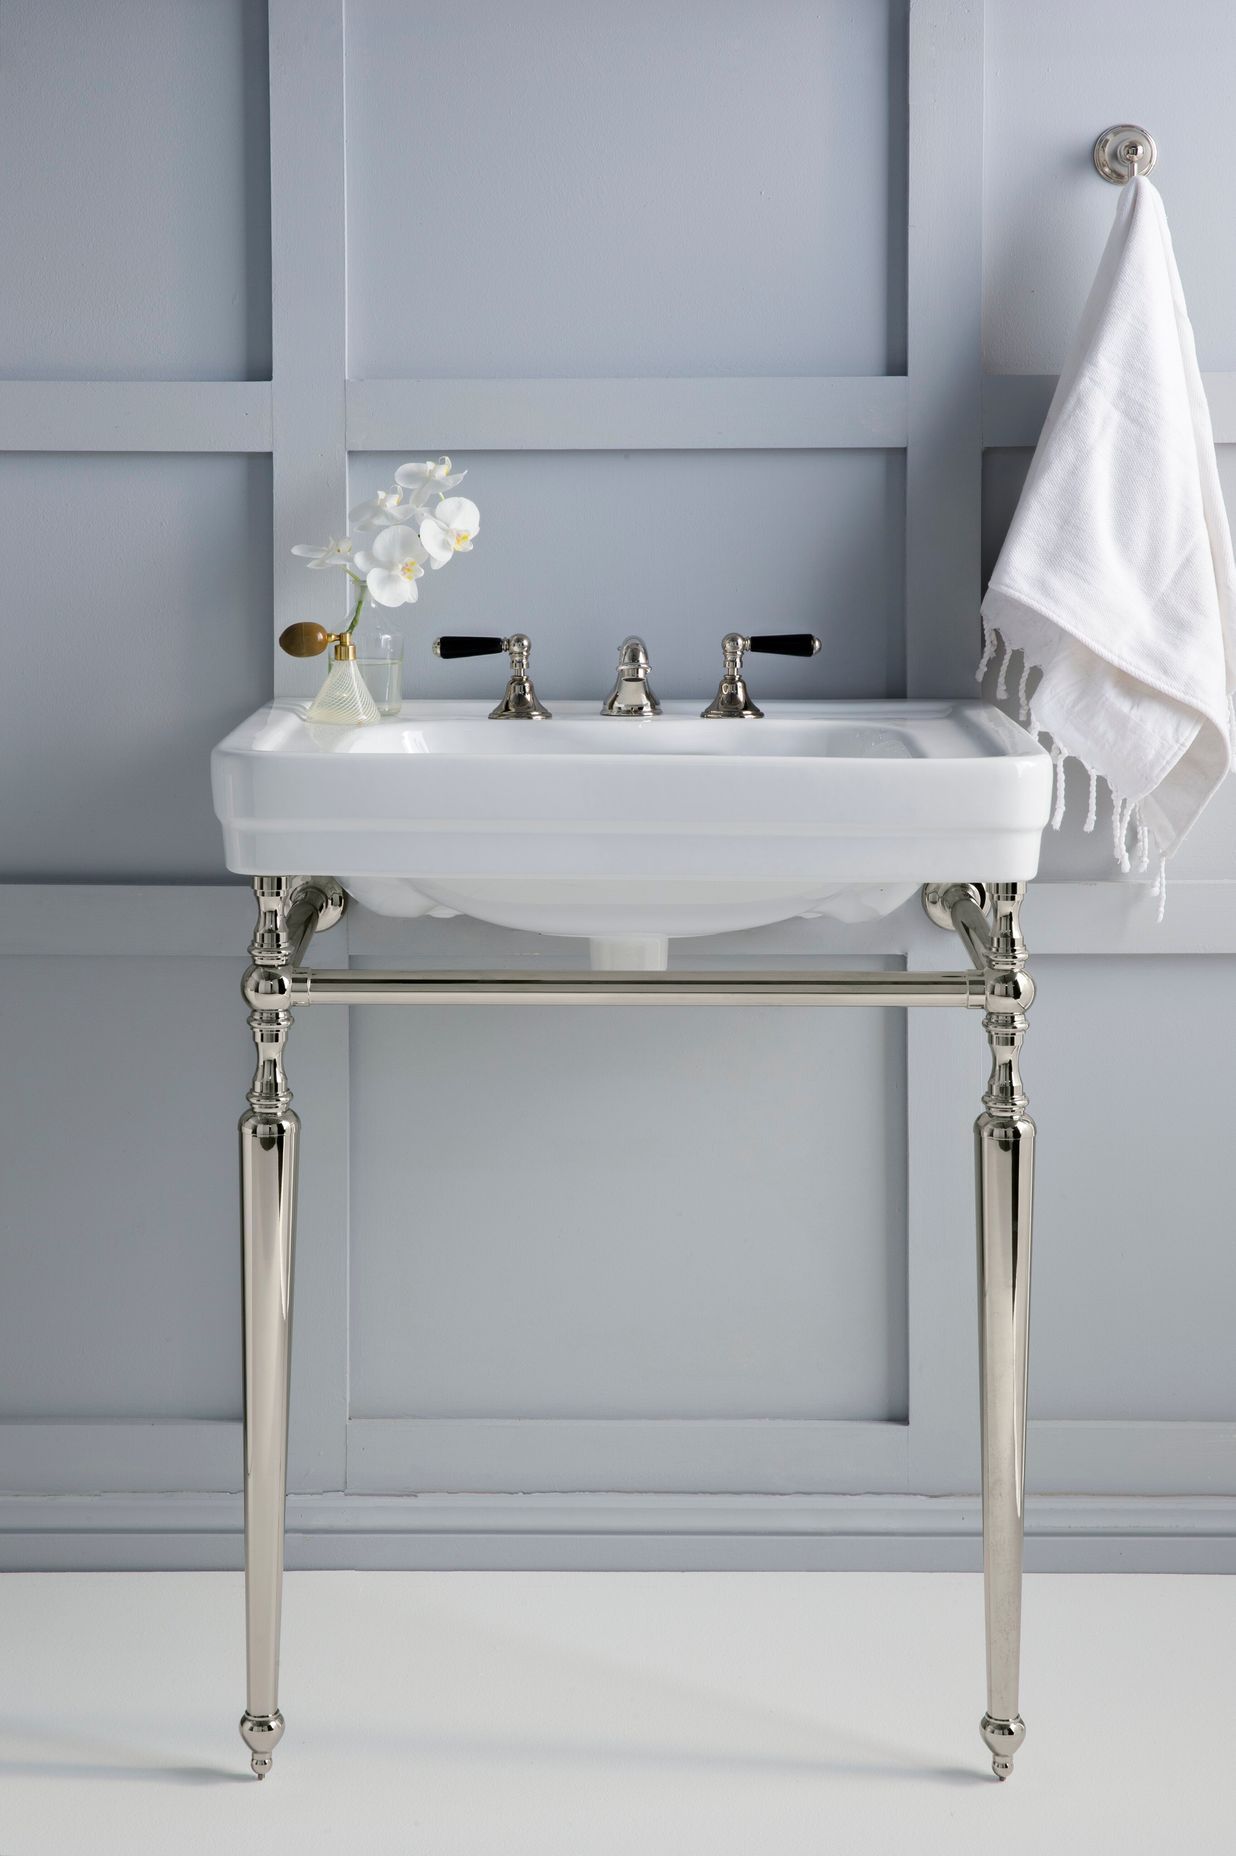 This porcelain basin and 3 tap set up is perfect for villas with low pressure water (Edwardian Nickel black porcelain basin and tapware from the Astra walker range)